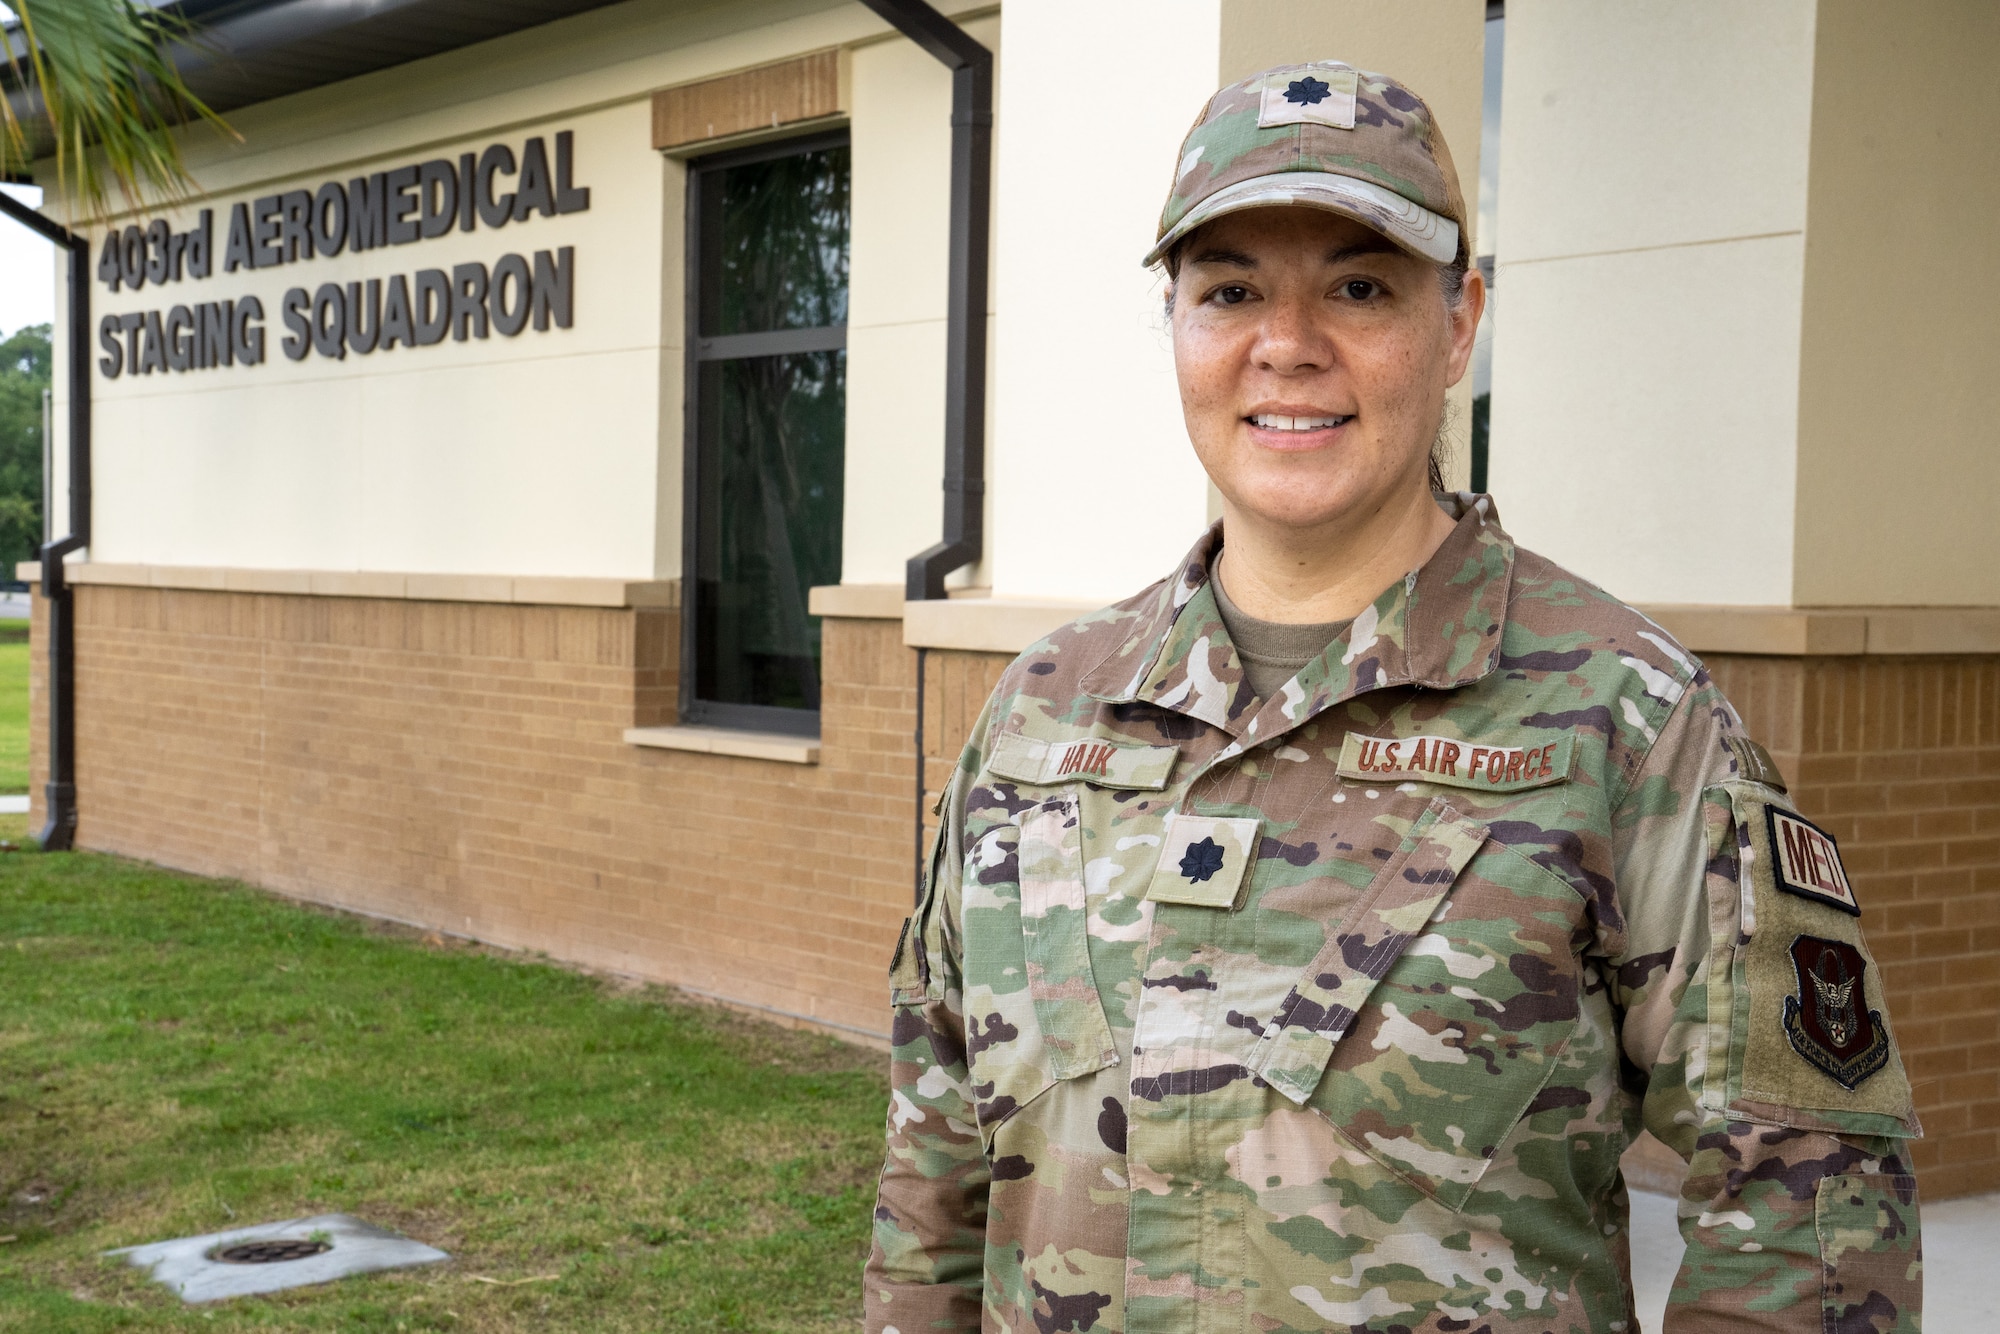 Lt. Col. Haik stands outside of the Aeromedical Staging Squadron building